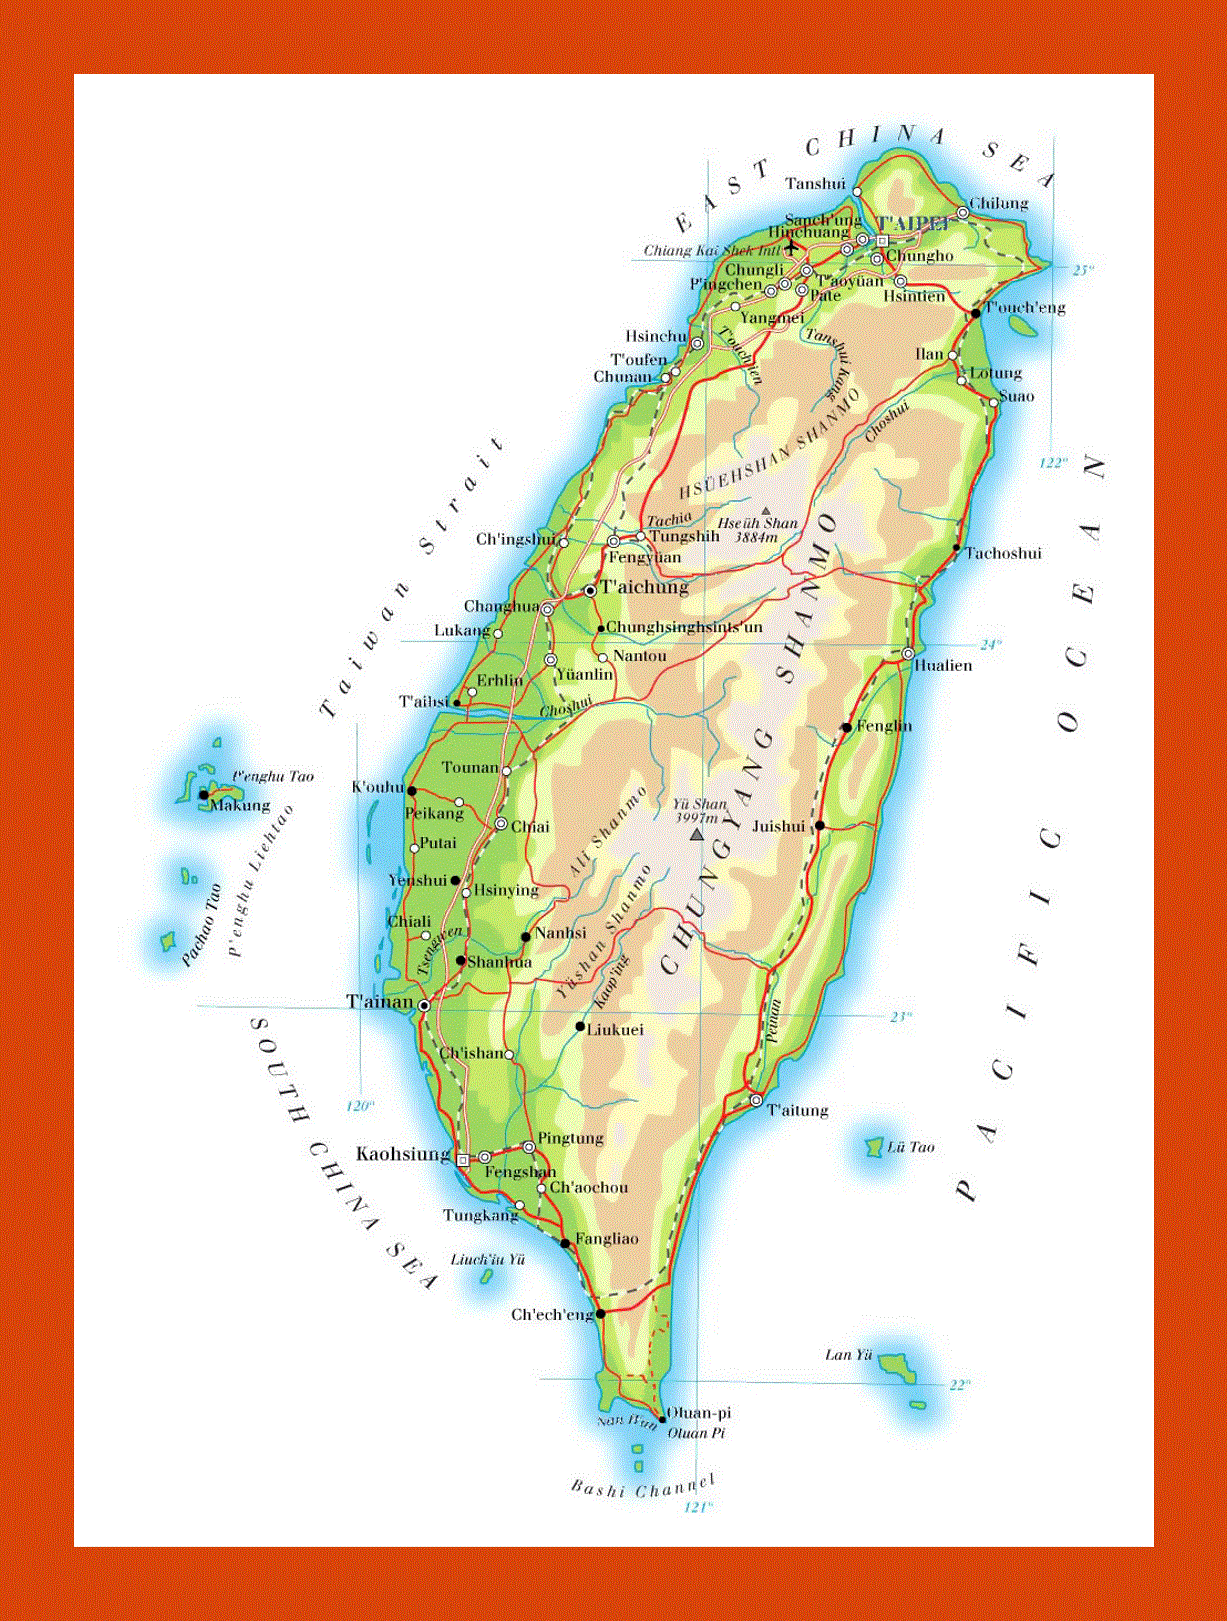 Elevation map of Taiwan